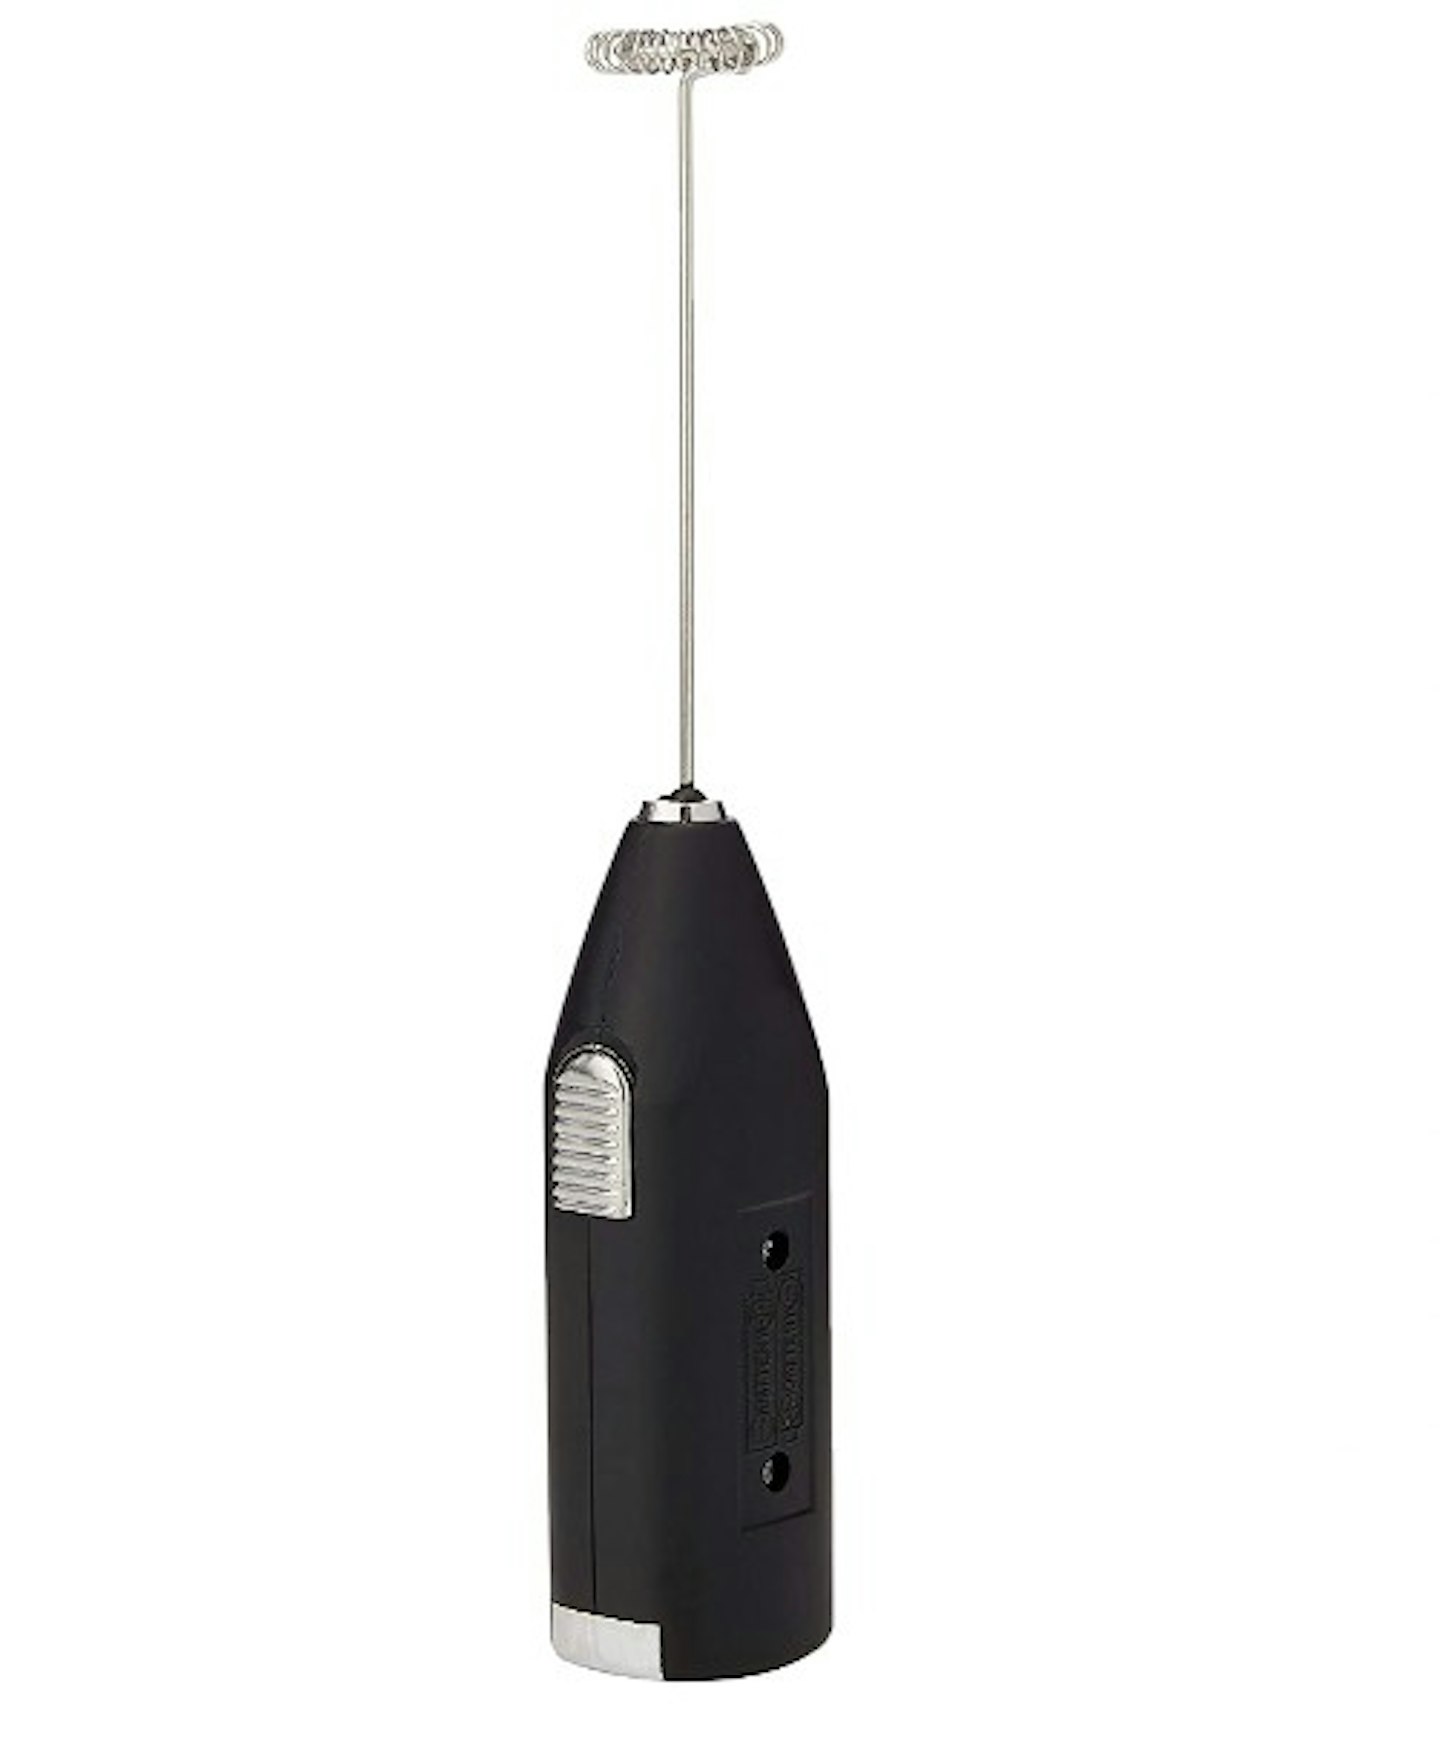  KitchenCraft Le'Xpress Electric Milk Frother Whisk,Black